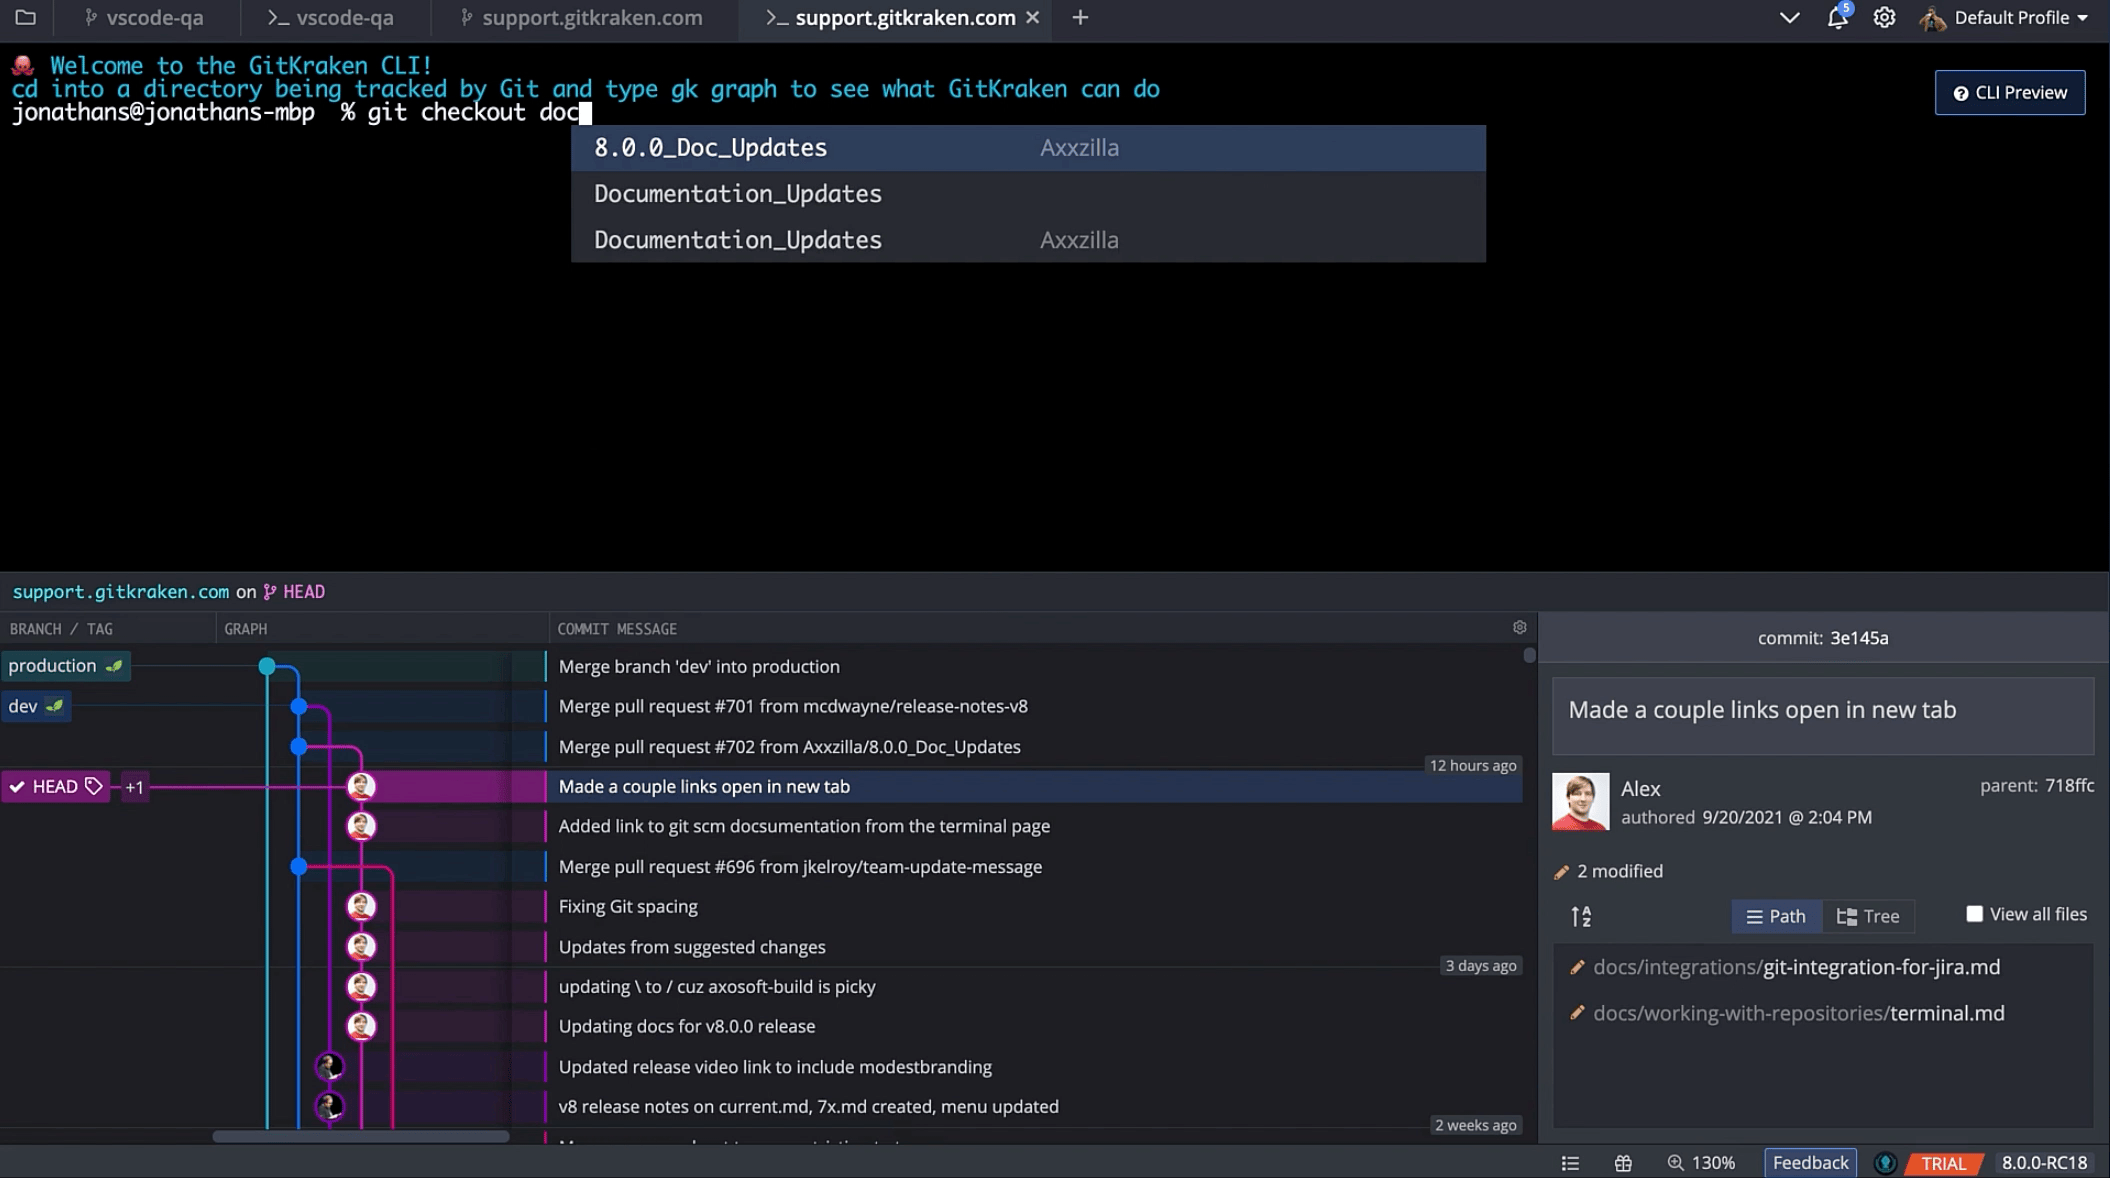 GitKraken Client’s CLI as well as the commit graph and diff view below the terminal.